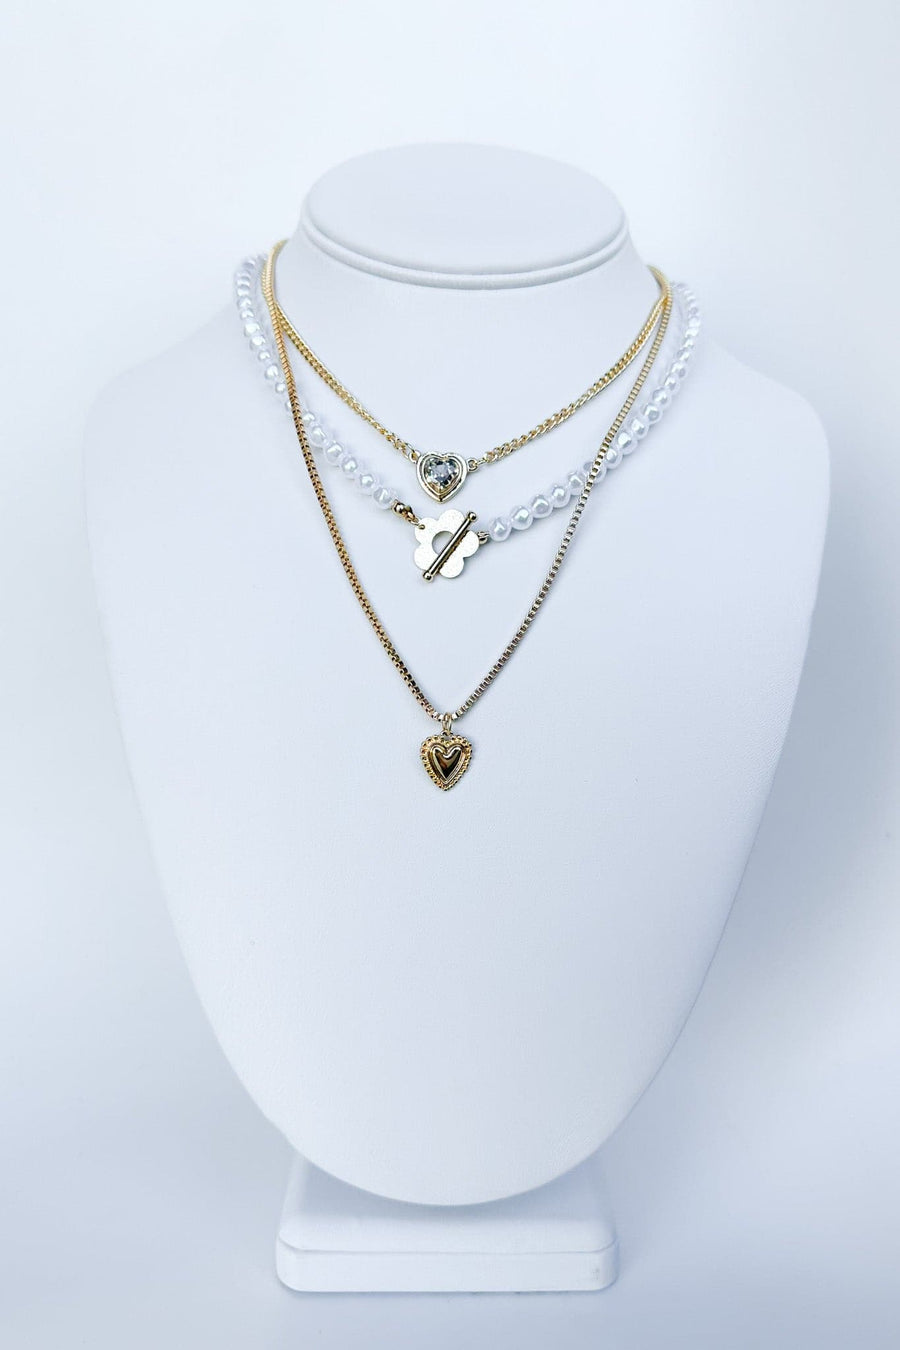 Gold Always a Classic Pearl Layered Necklace - BACK IN STOCK - kitchencabinetmagic